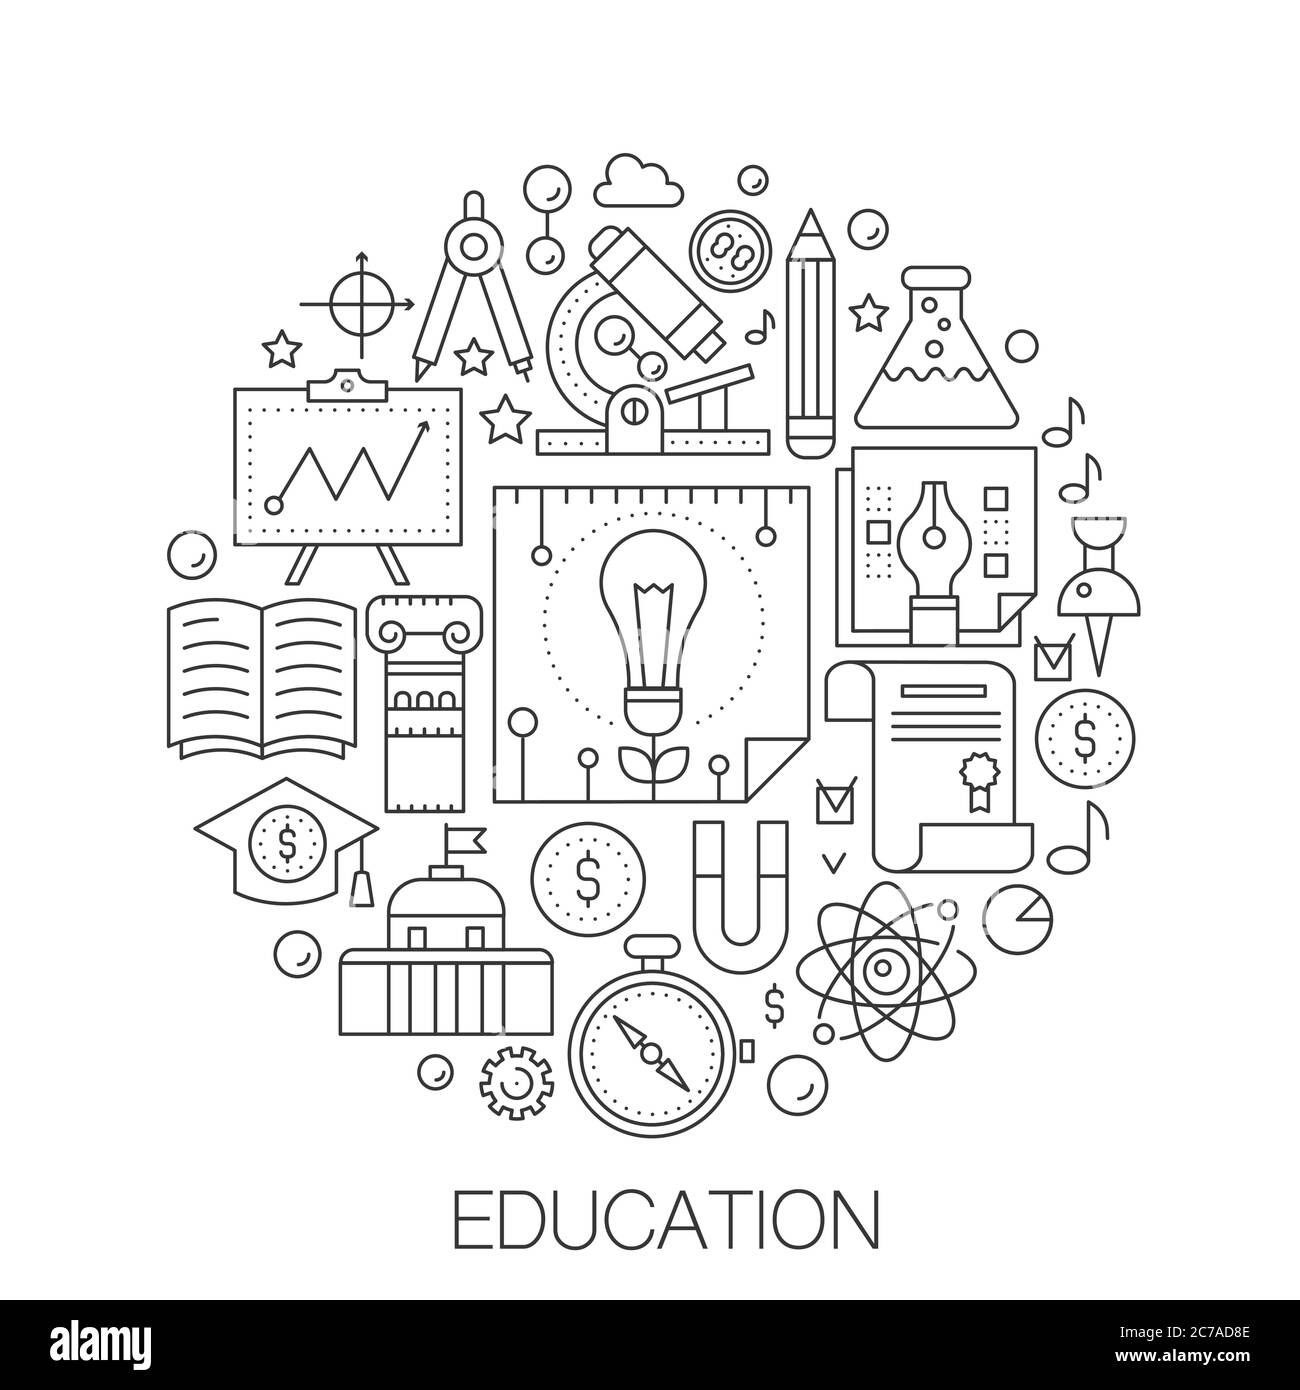 Education in circle - concept line illustration for cover, emblem, badge. School university education thin line stroke icons Stock Vector